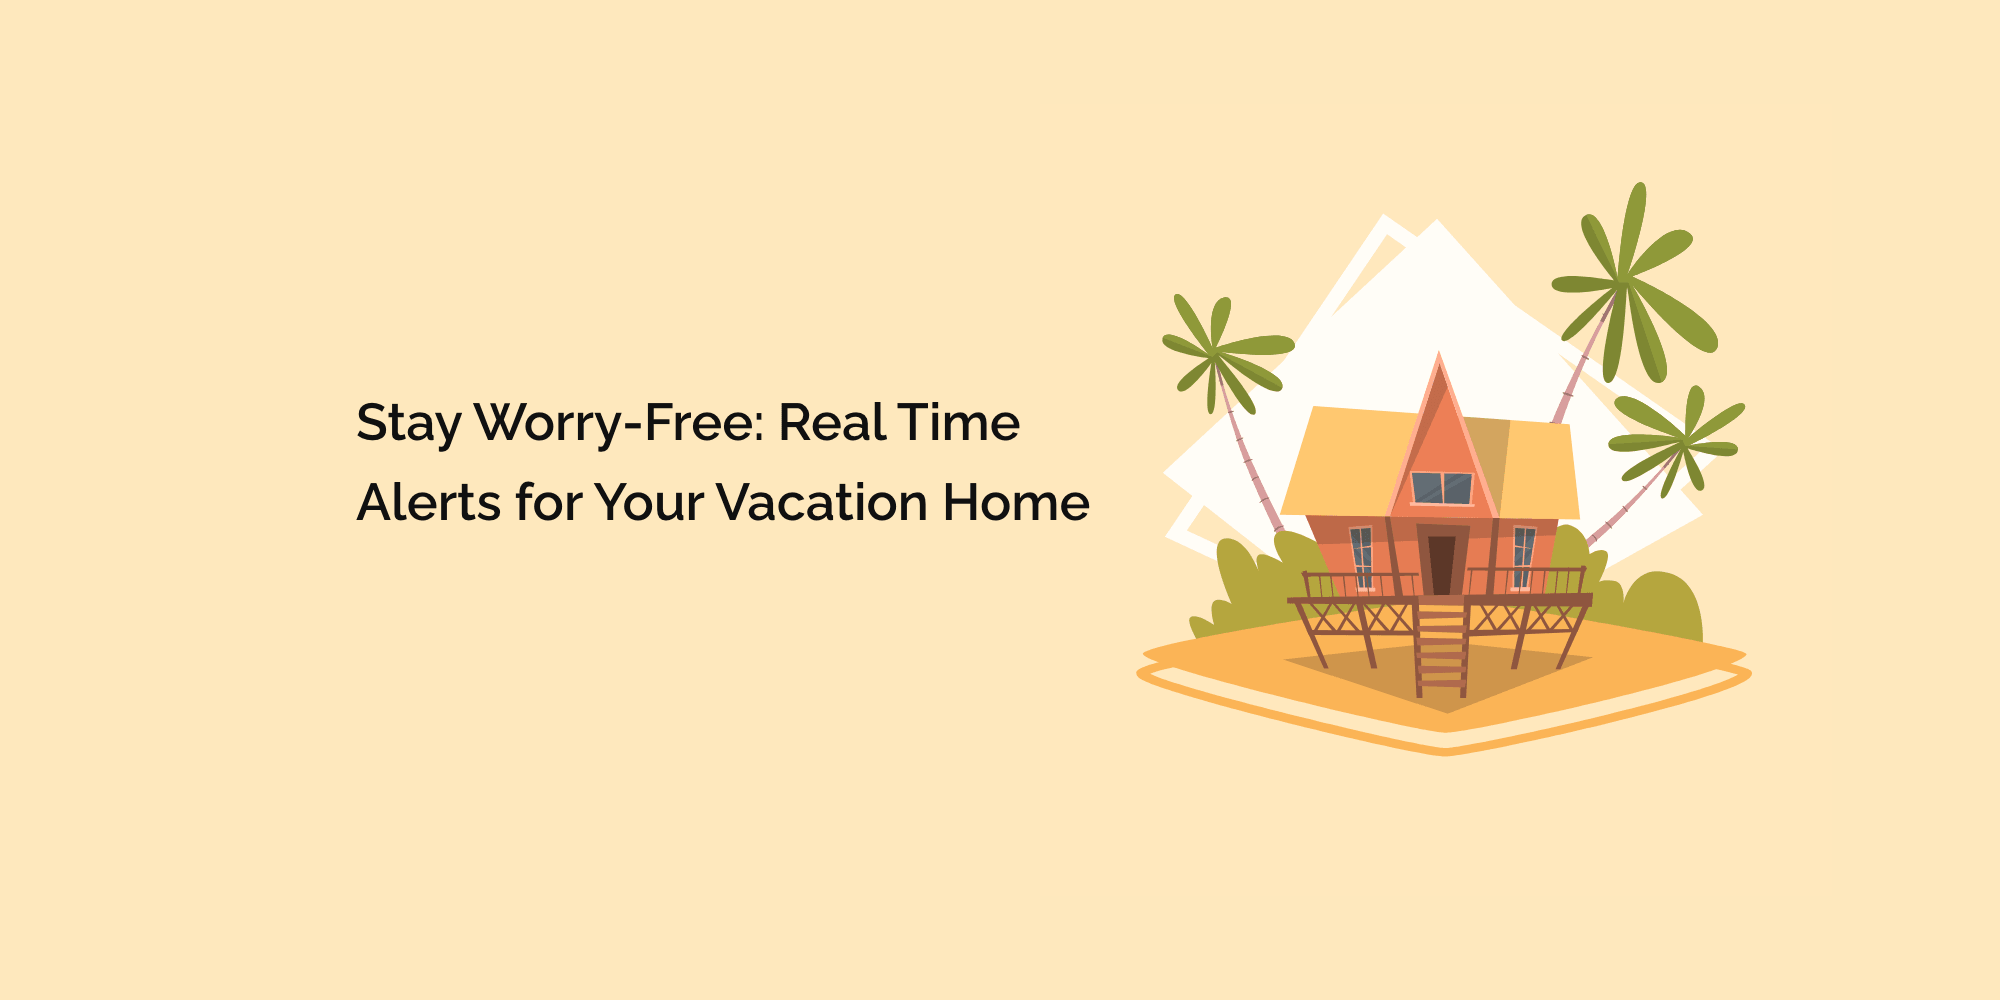 Stay Worry-Free: Real-Time Alerts for Your Vacation Home